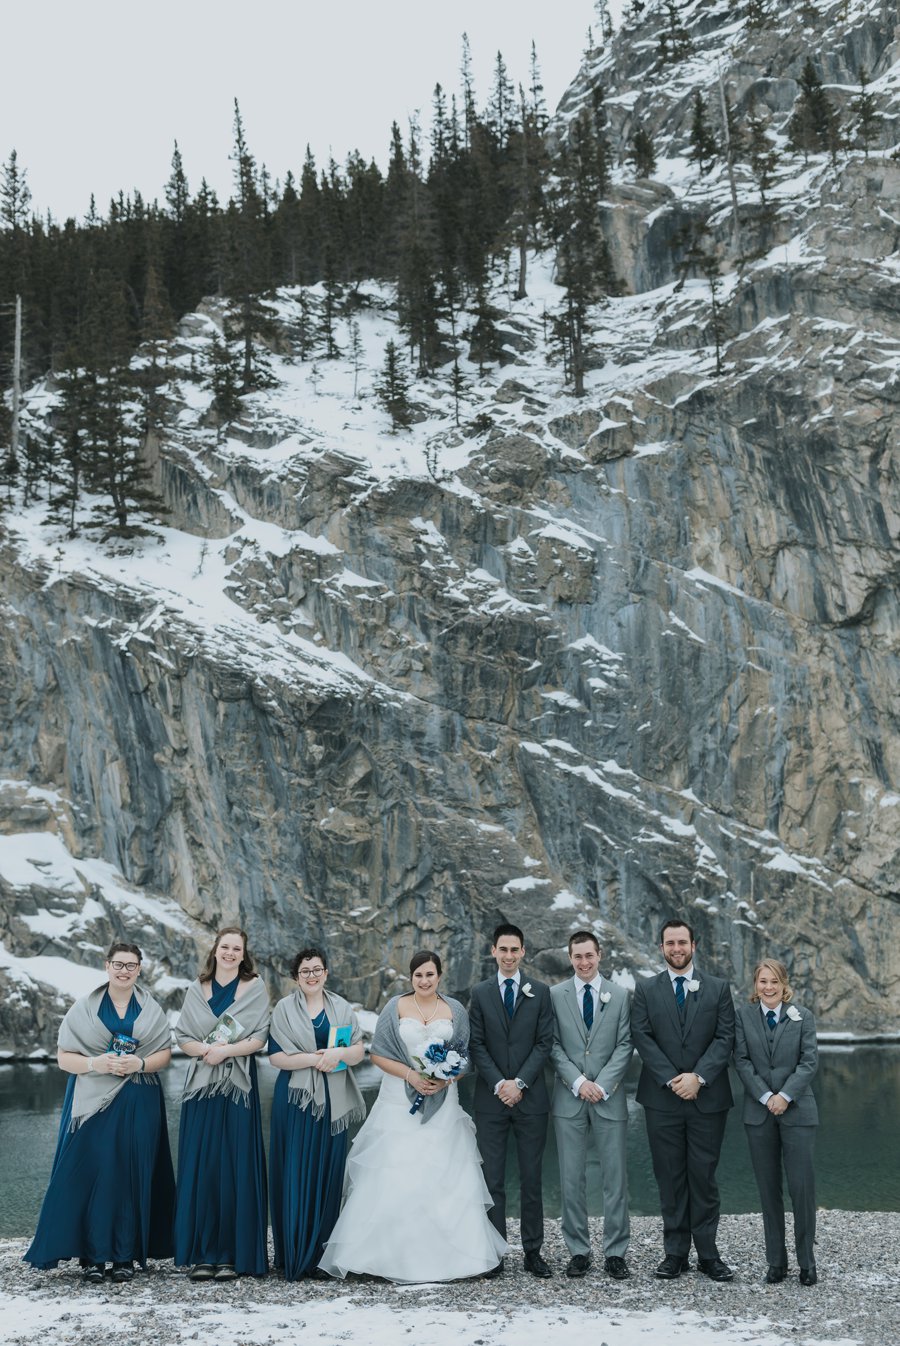 Canmore wedding photographers portraits mountains winter bridal party